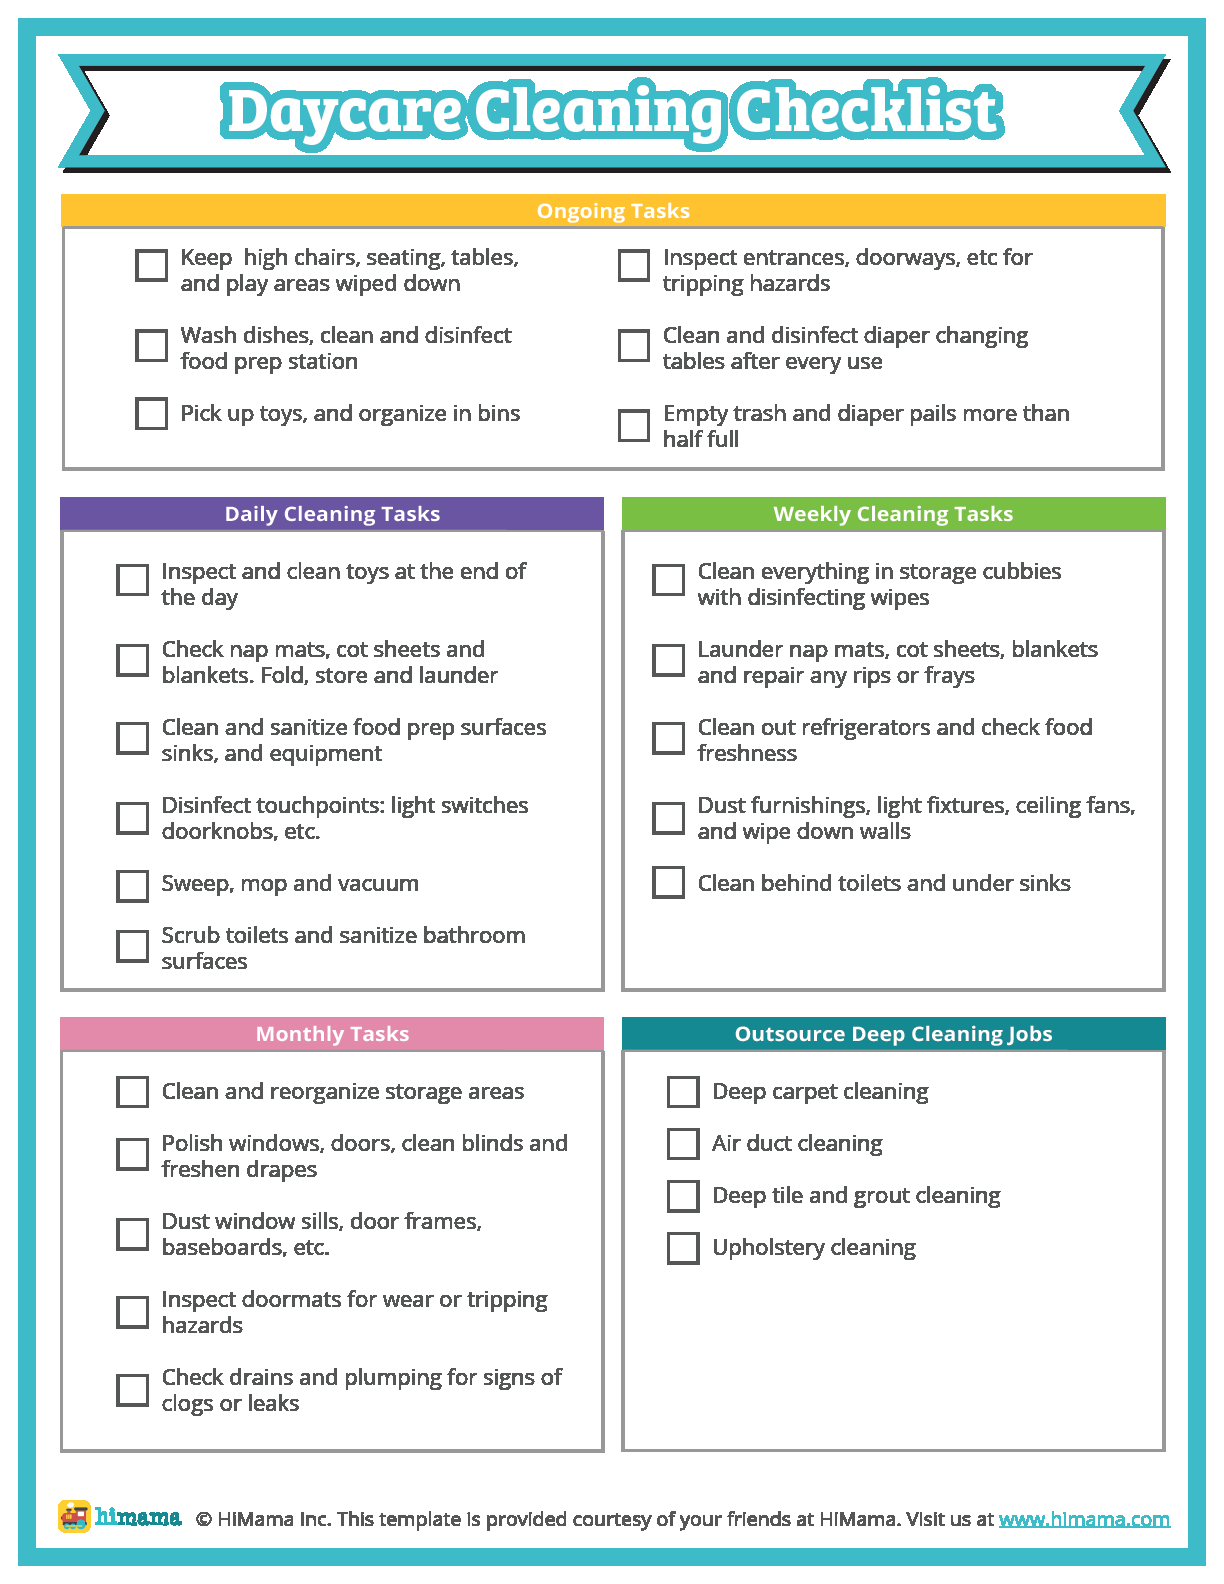 Daycare Cleaning Checklist - Free Templates  HiMama Intended For Daycare Checklist Template Within Daycare Checklist Template